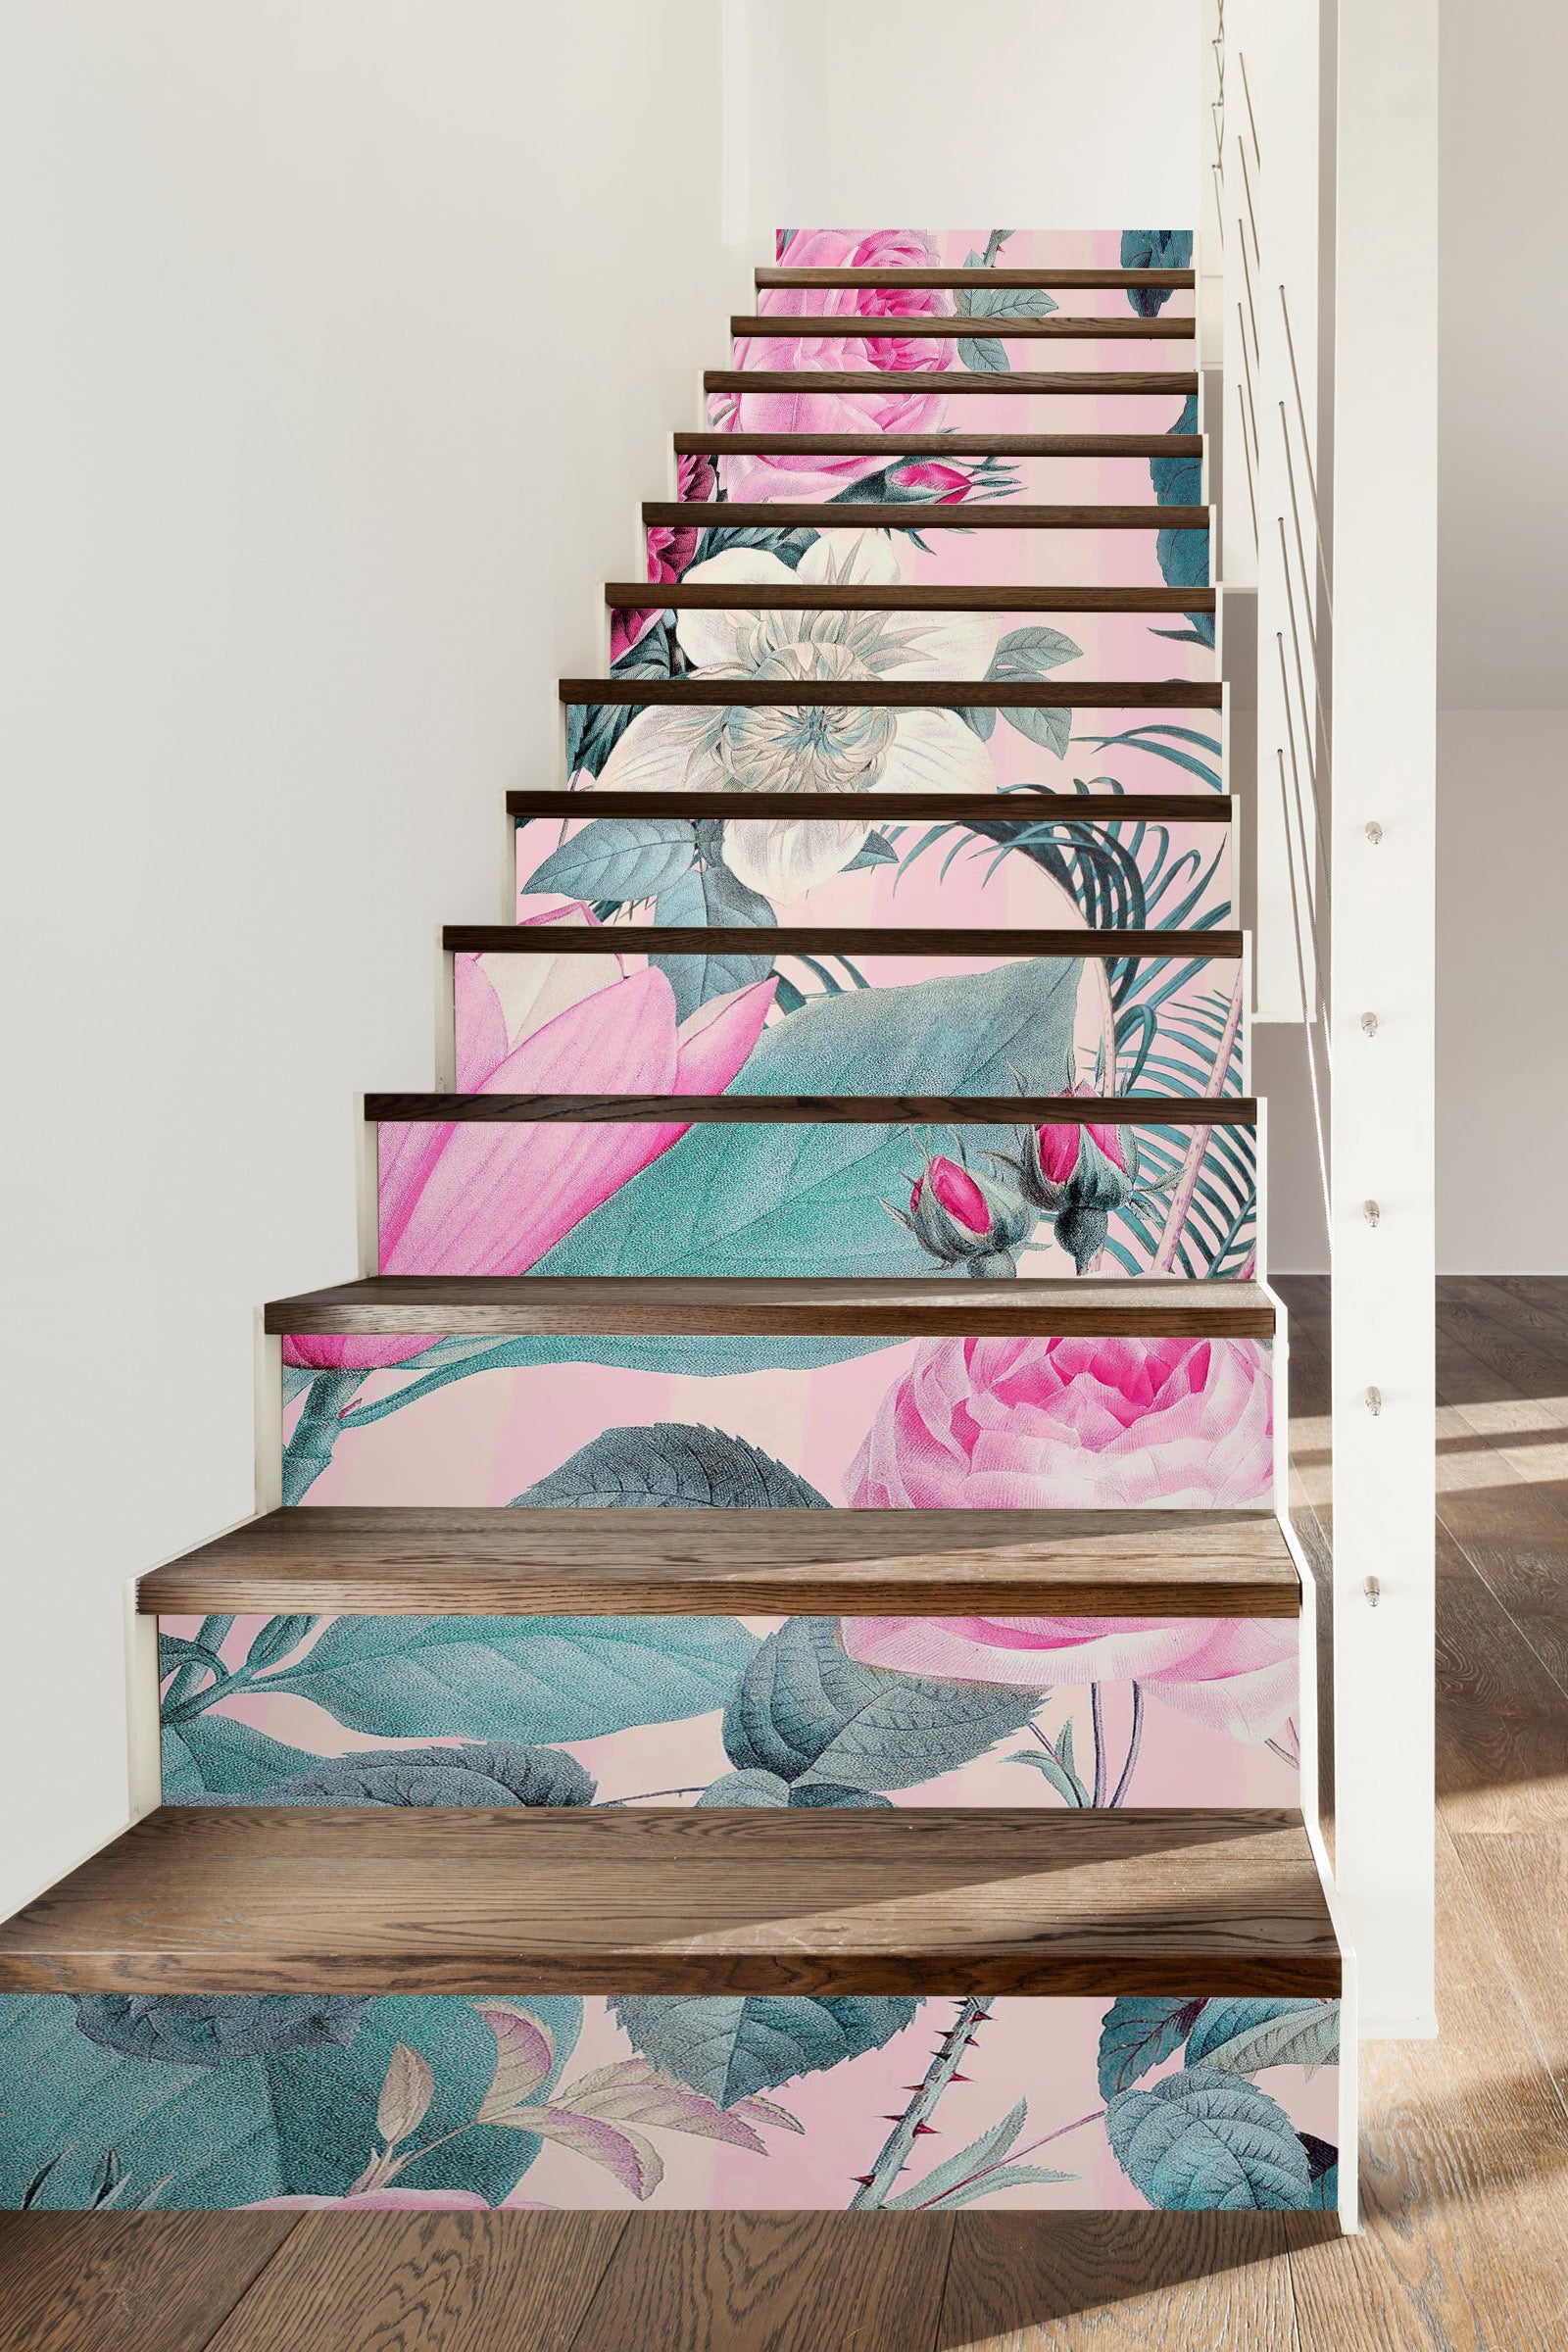 3D Rose Flower 109204 Andrea Haase Stair Risers